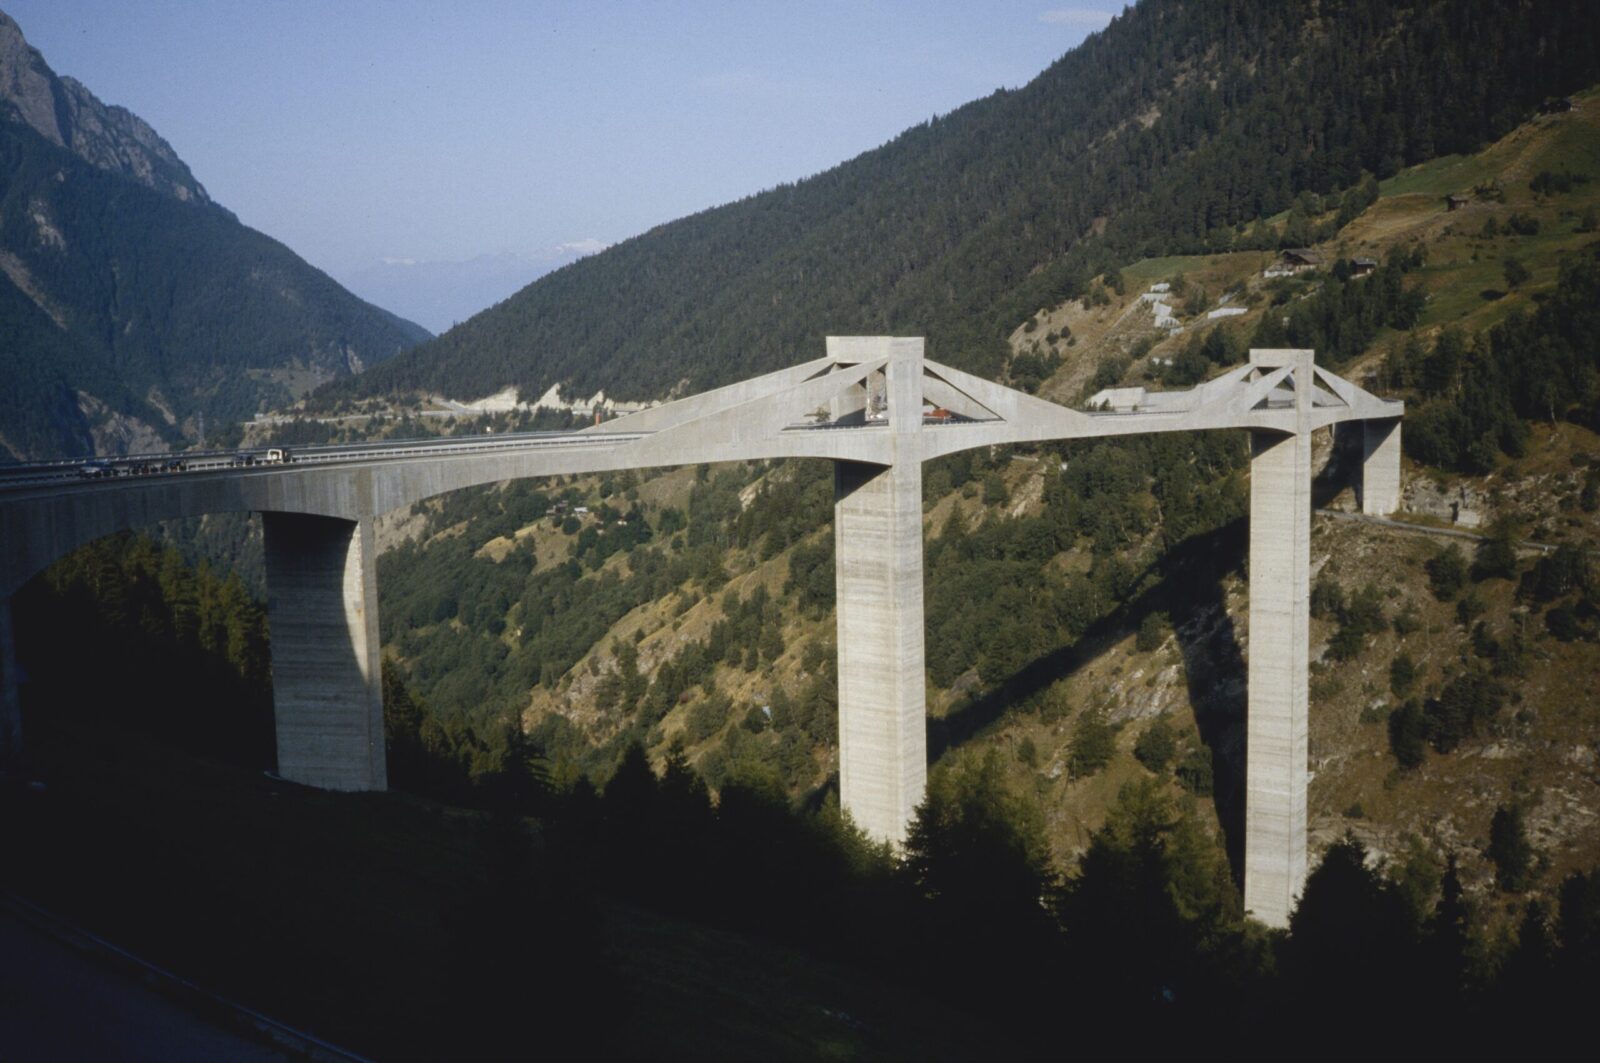 Part of the Simplon motorway, the Ganter Bridge in the canton of Valais, which opened in 1980, was designed by multiple award-winning ETH Professor Christian Menn (1927–2018).